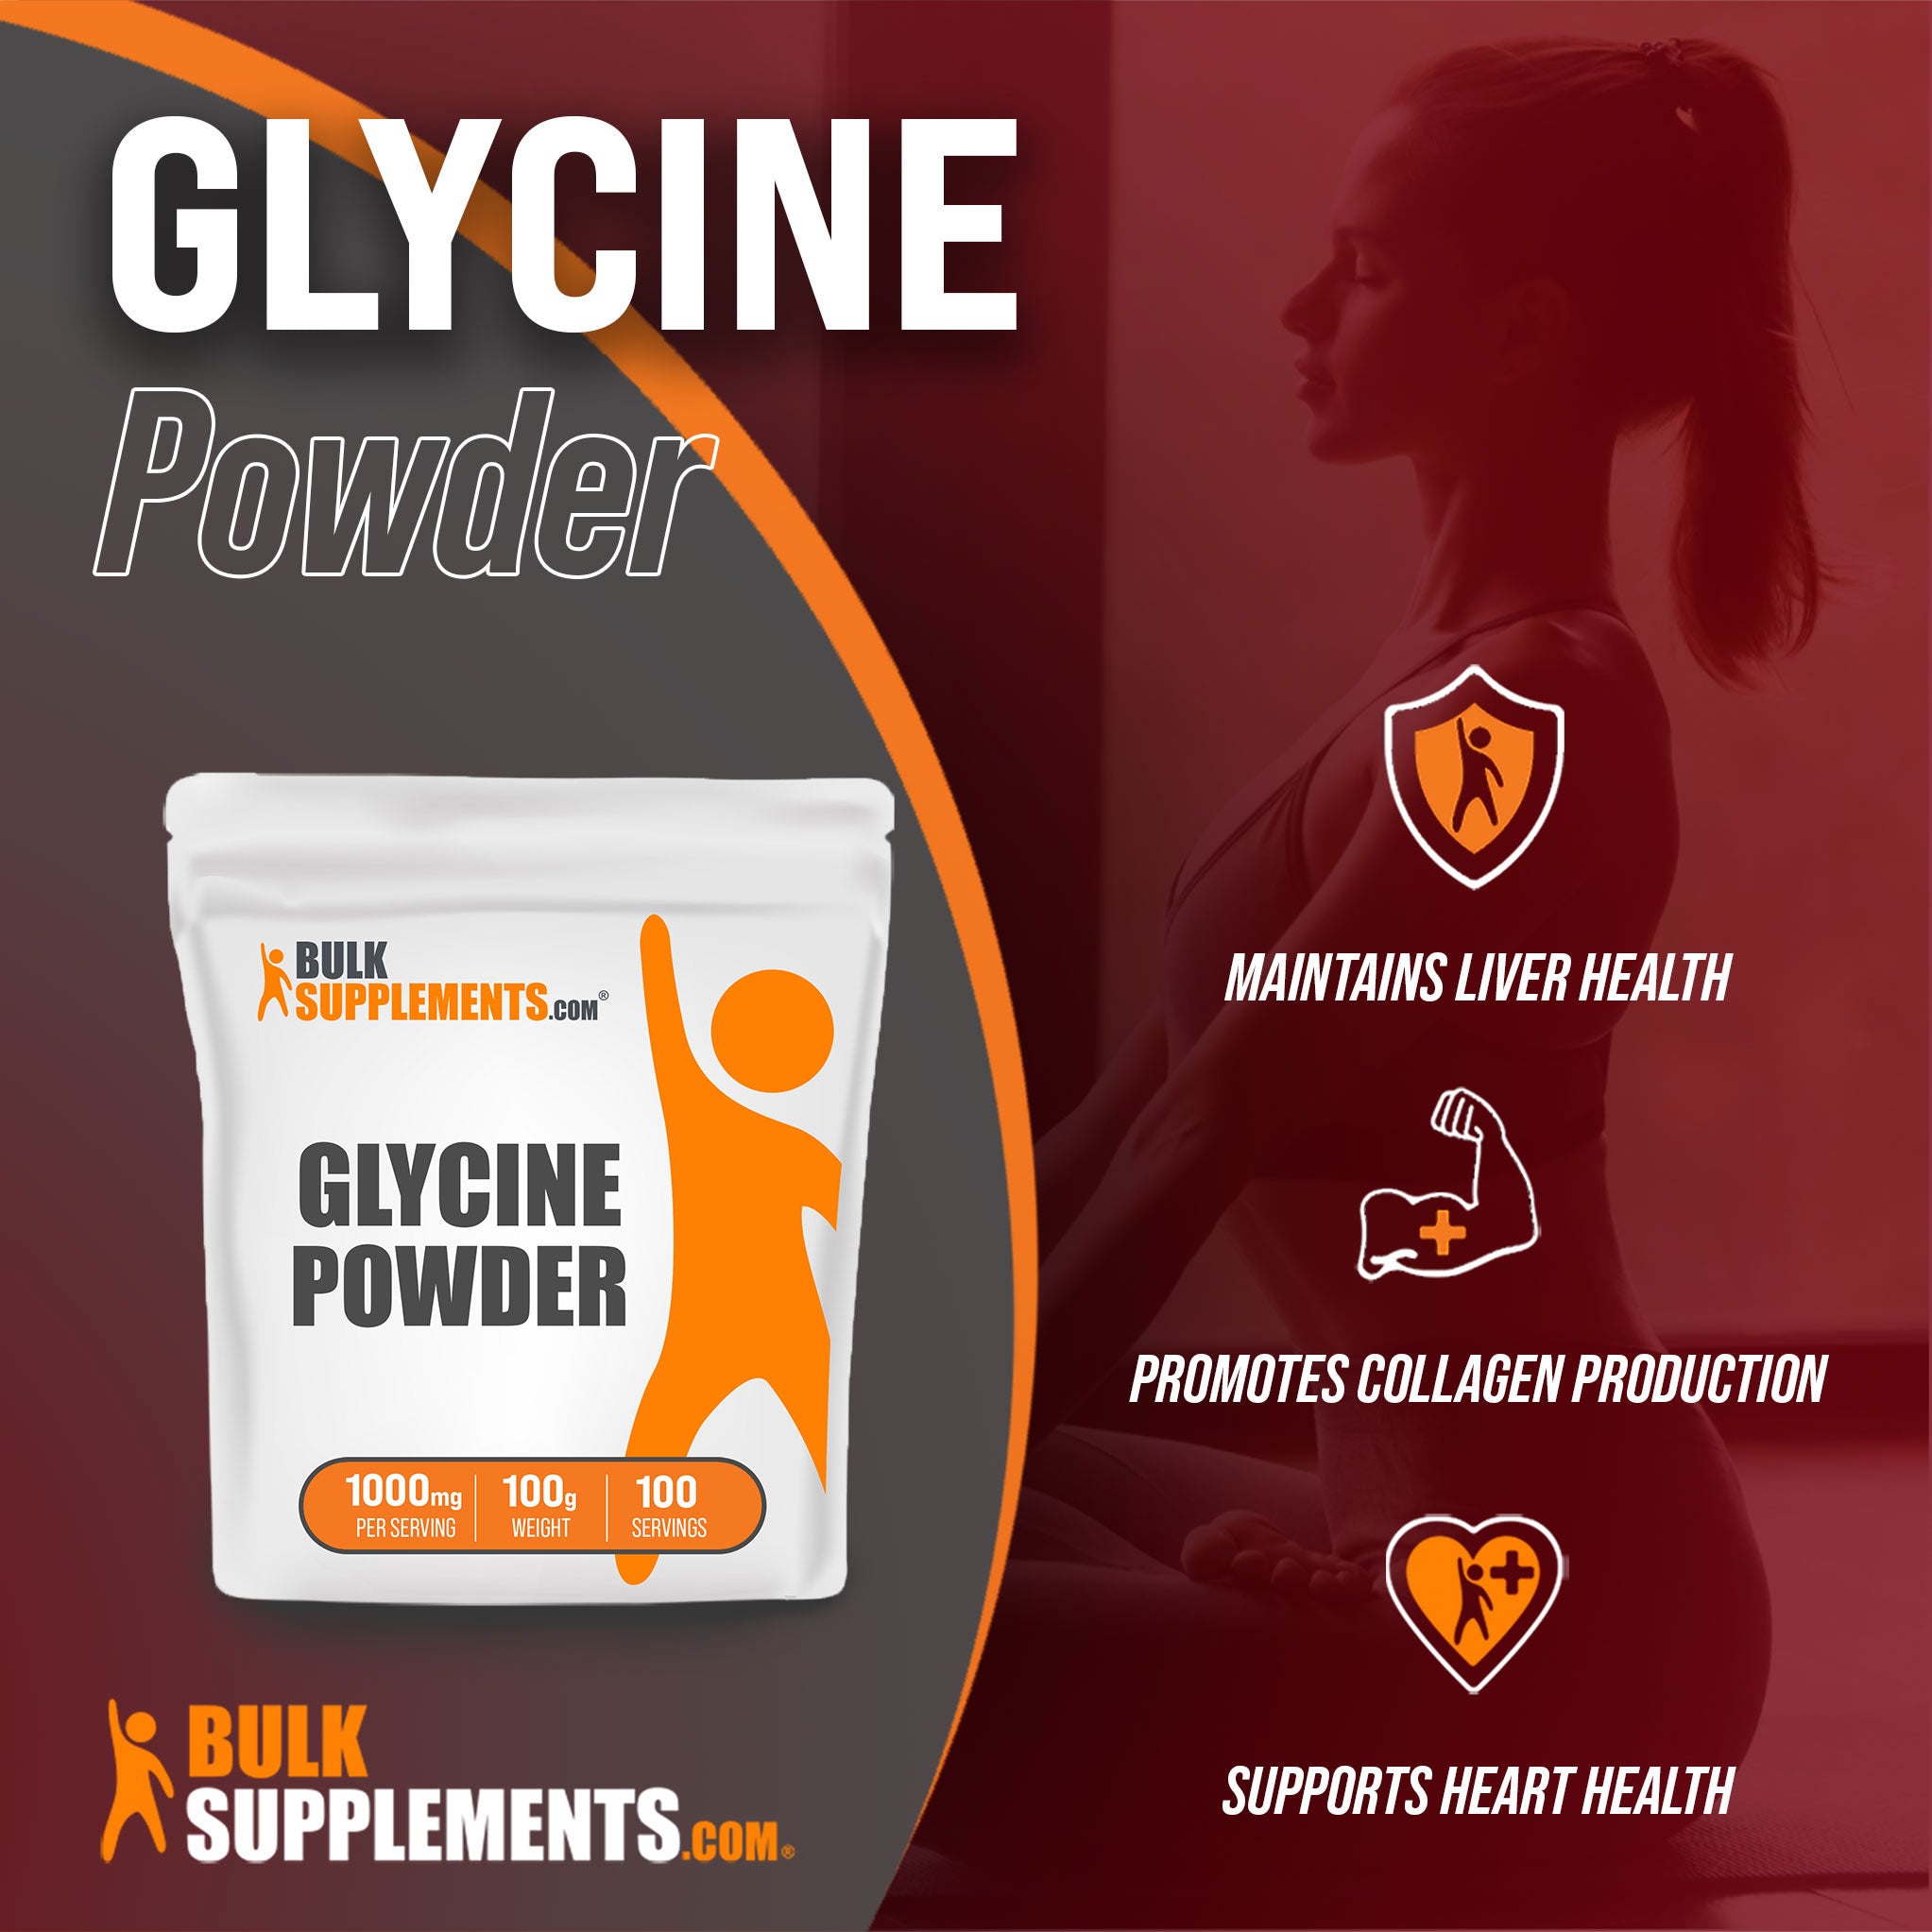 Benefits of Glycine; maintains liver health, promotes collagen production, supports heart health